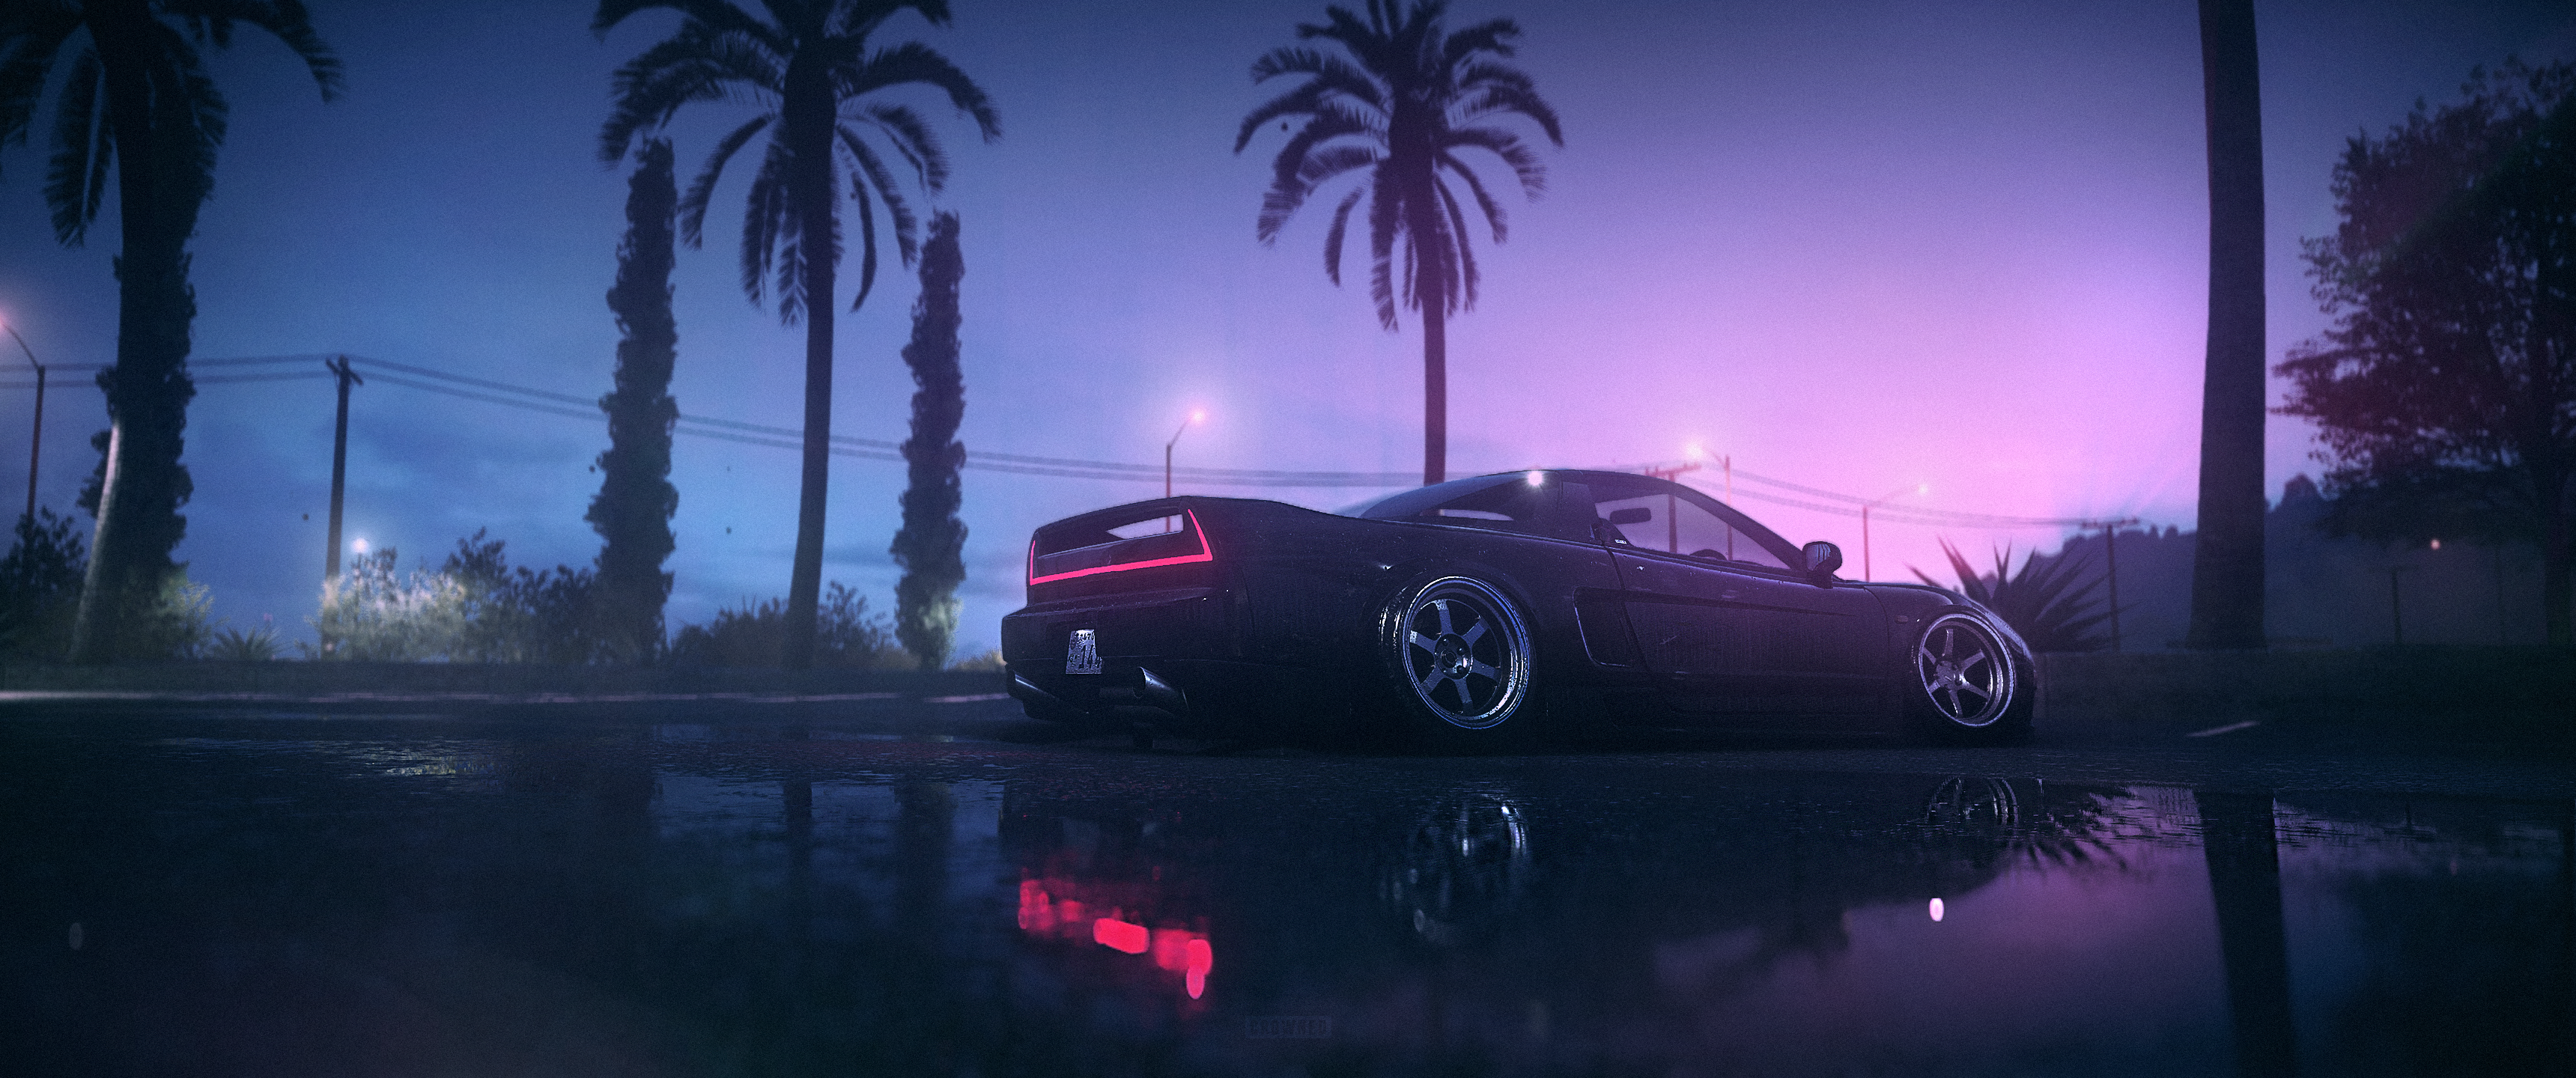 Wallpaper, NFS crowned, Need for Speed, Need For Speed car, cinematic 3440x1440